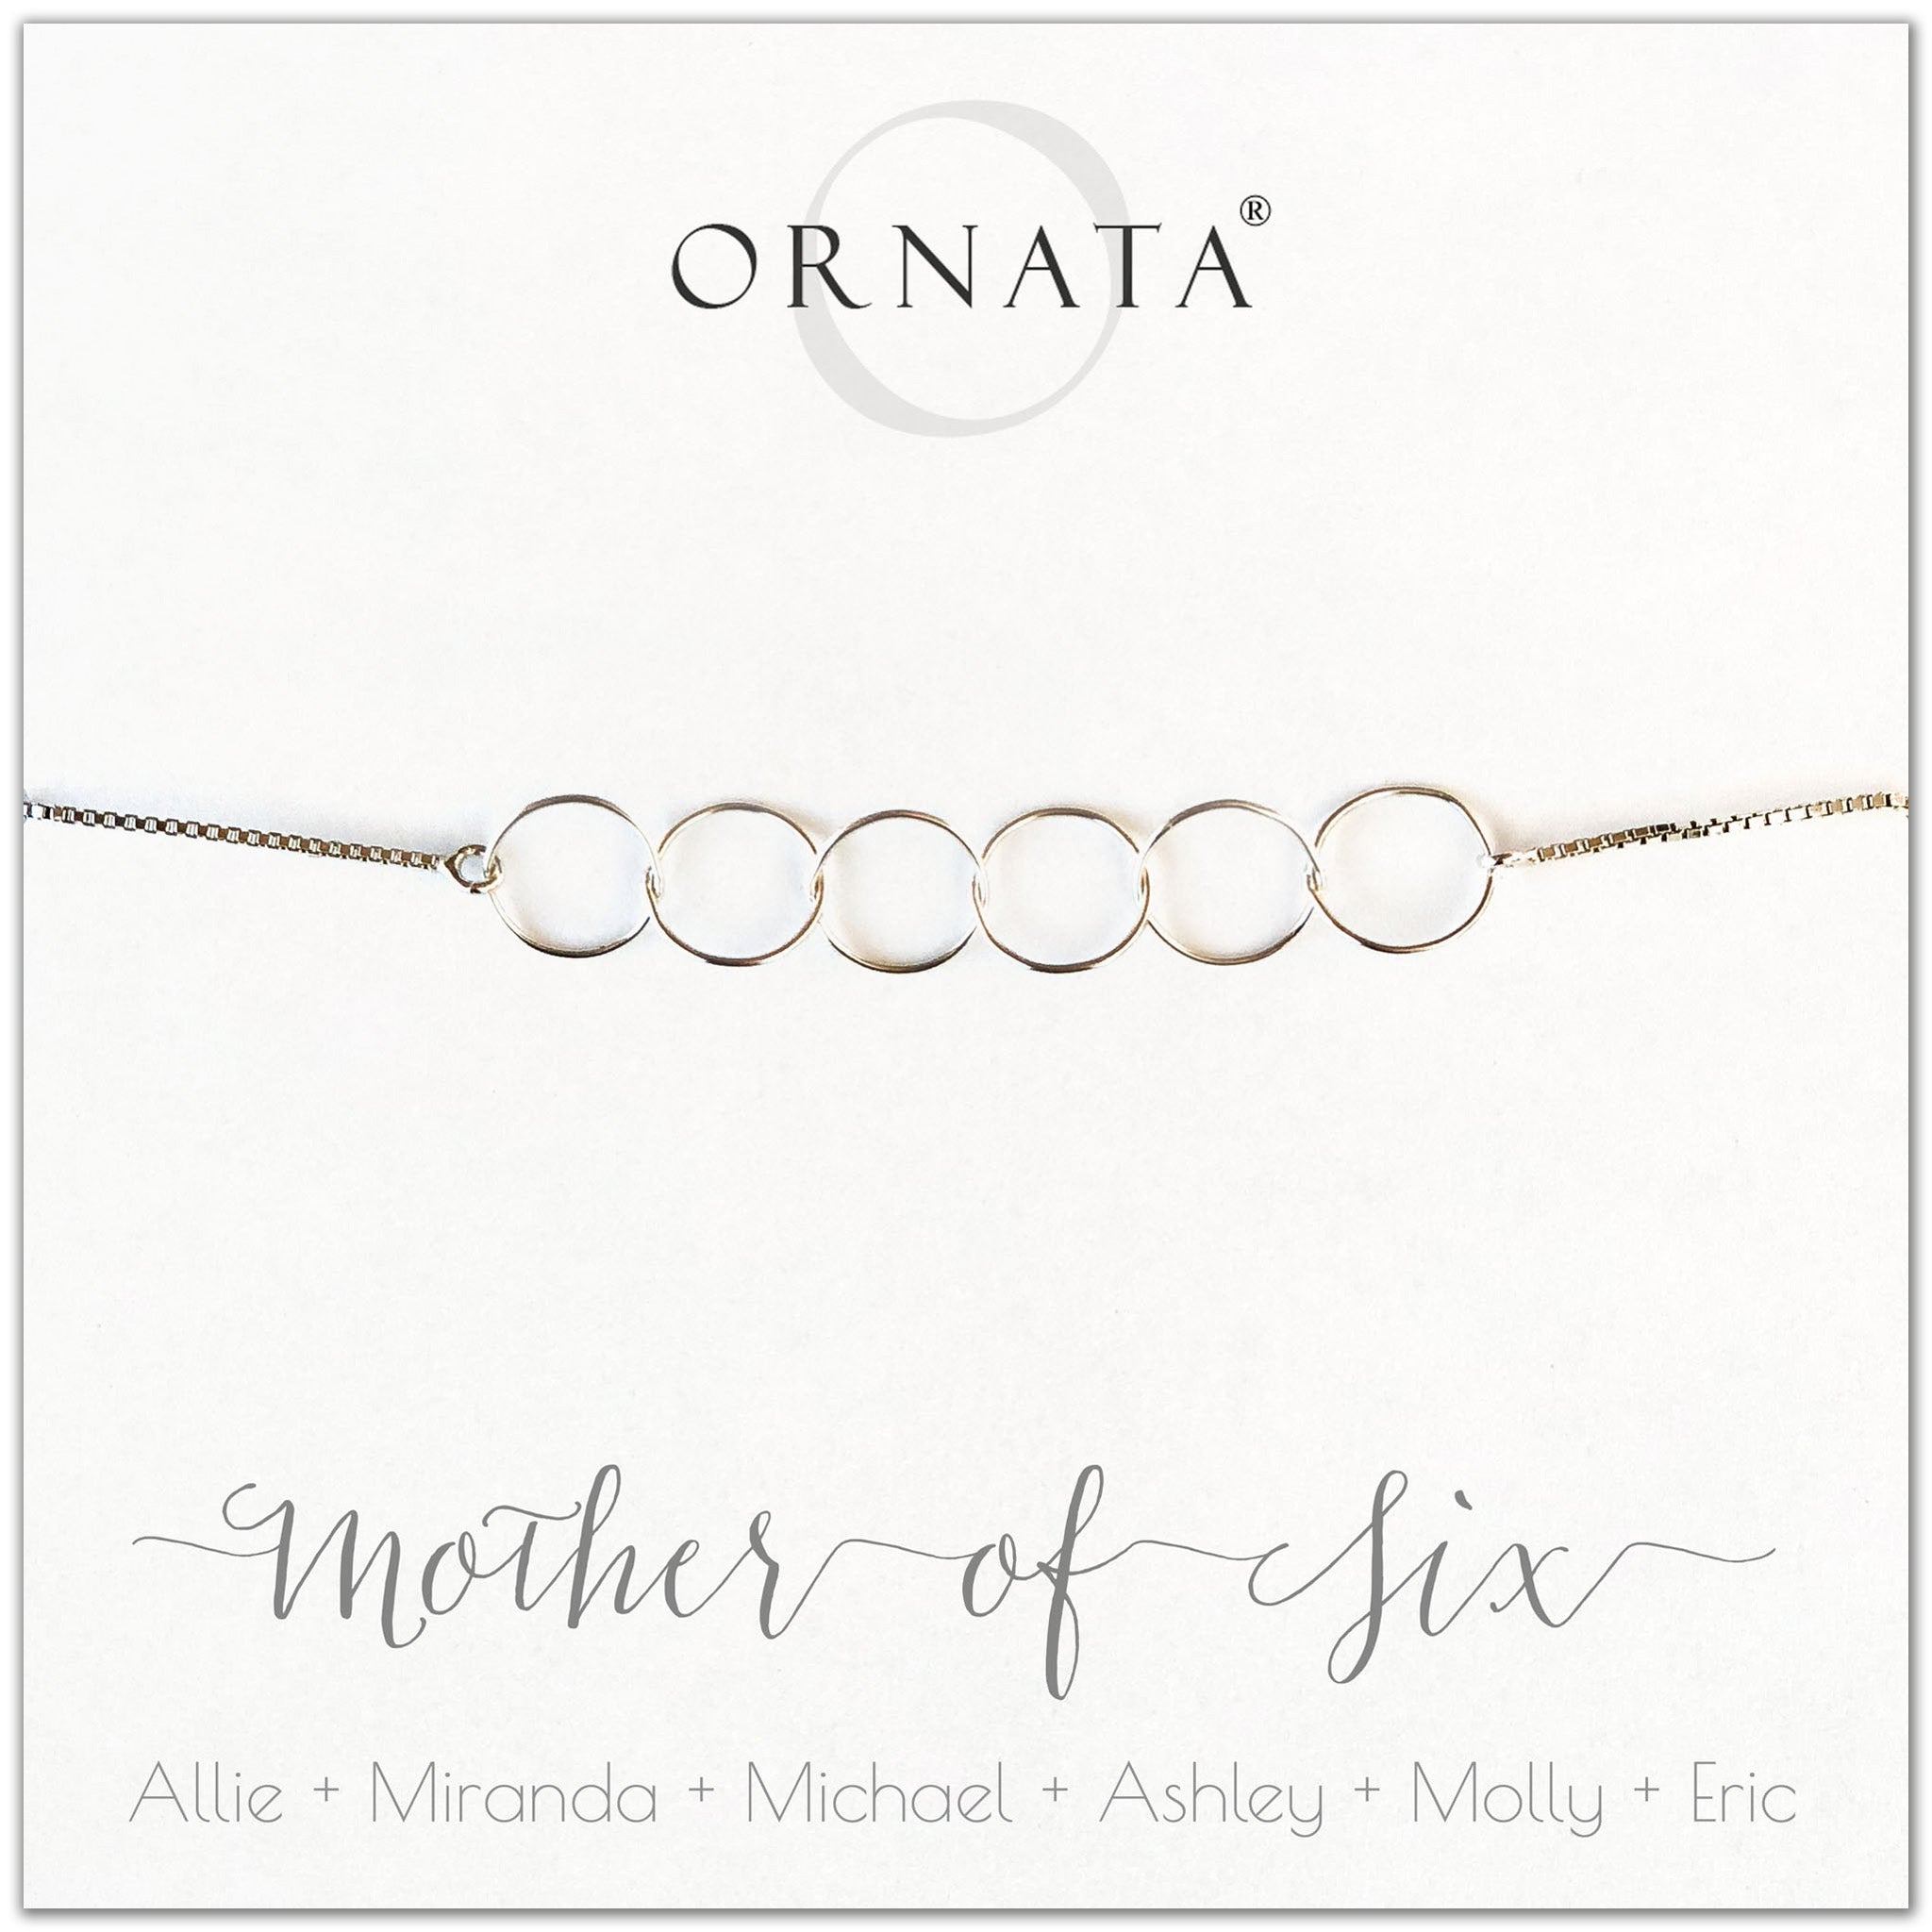 Mother of six personalized sterling silver bolo bracelet. Our custom bracelets make good gifts for moms and family. Great mother’s day gift.